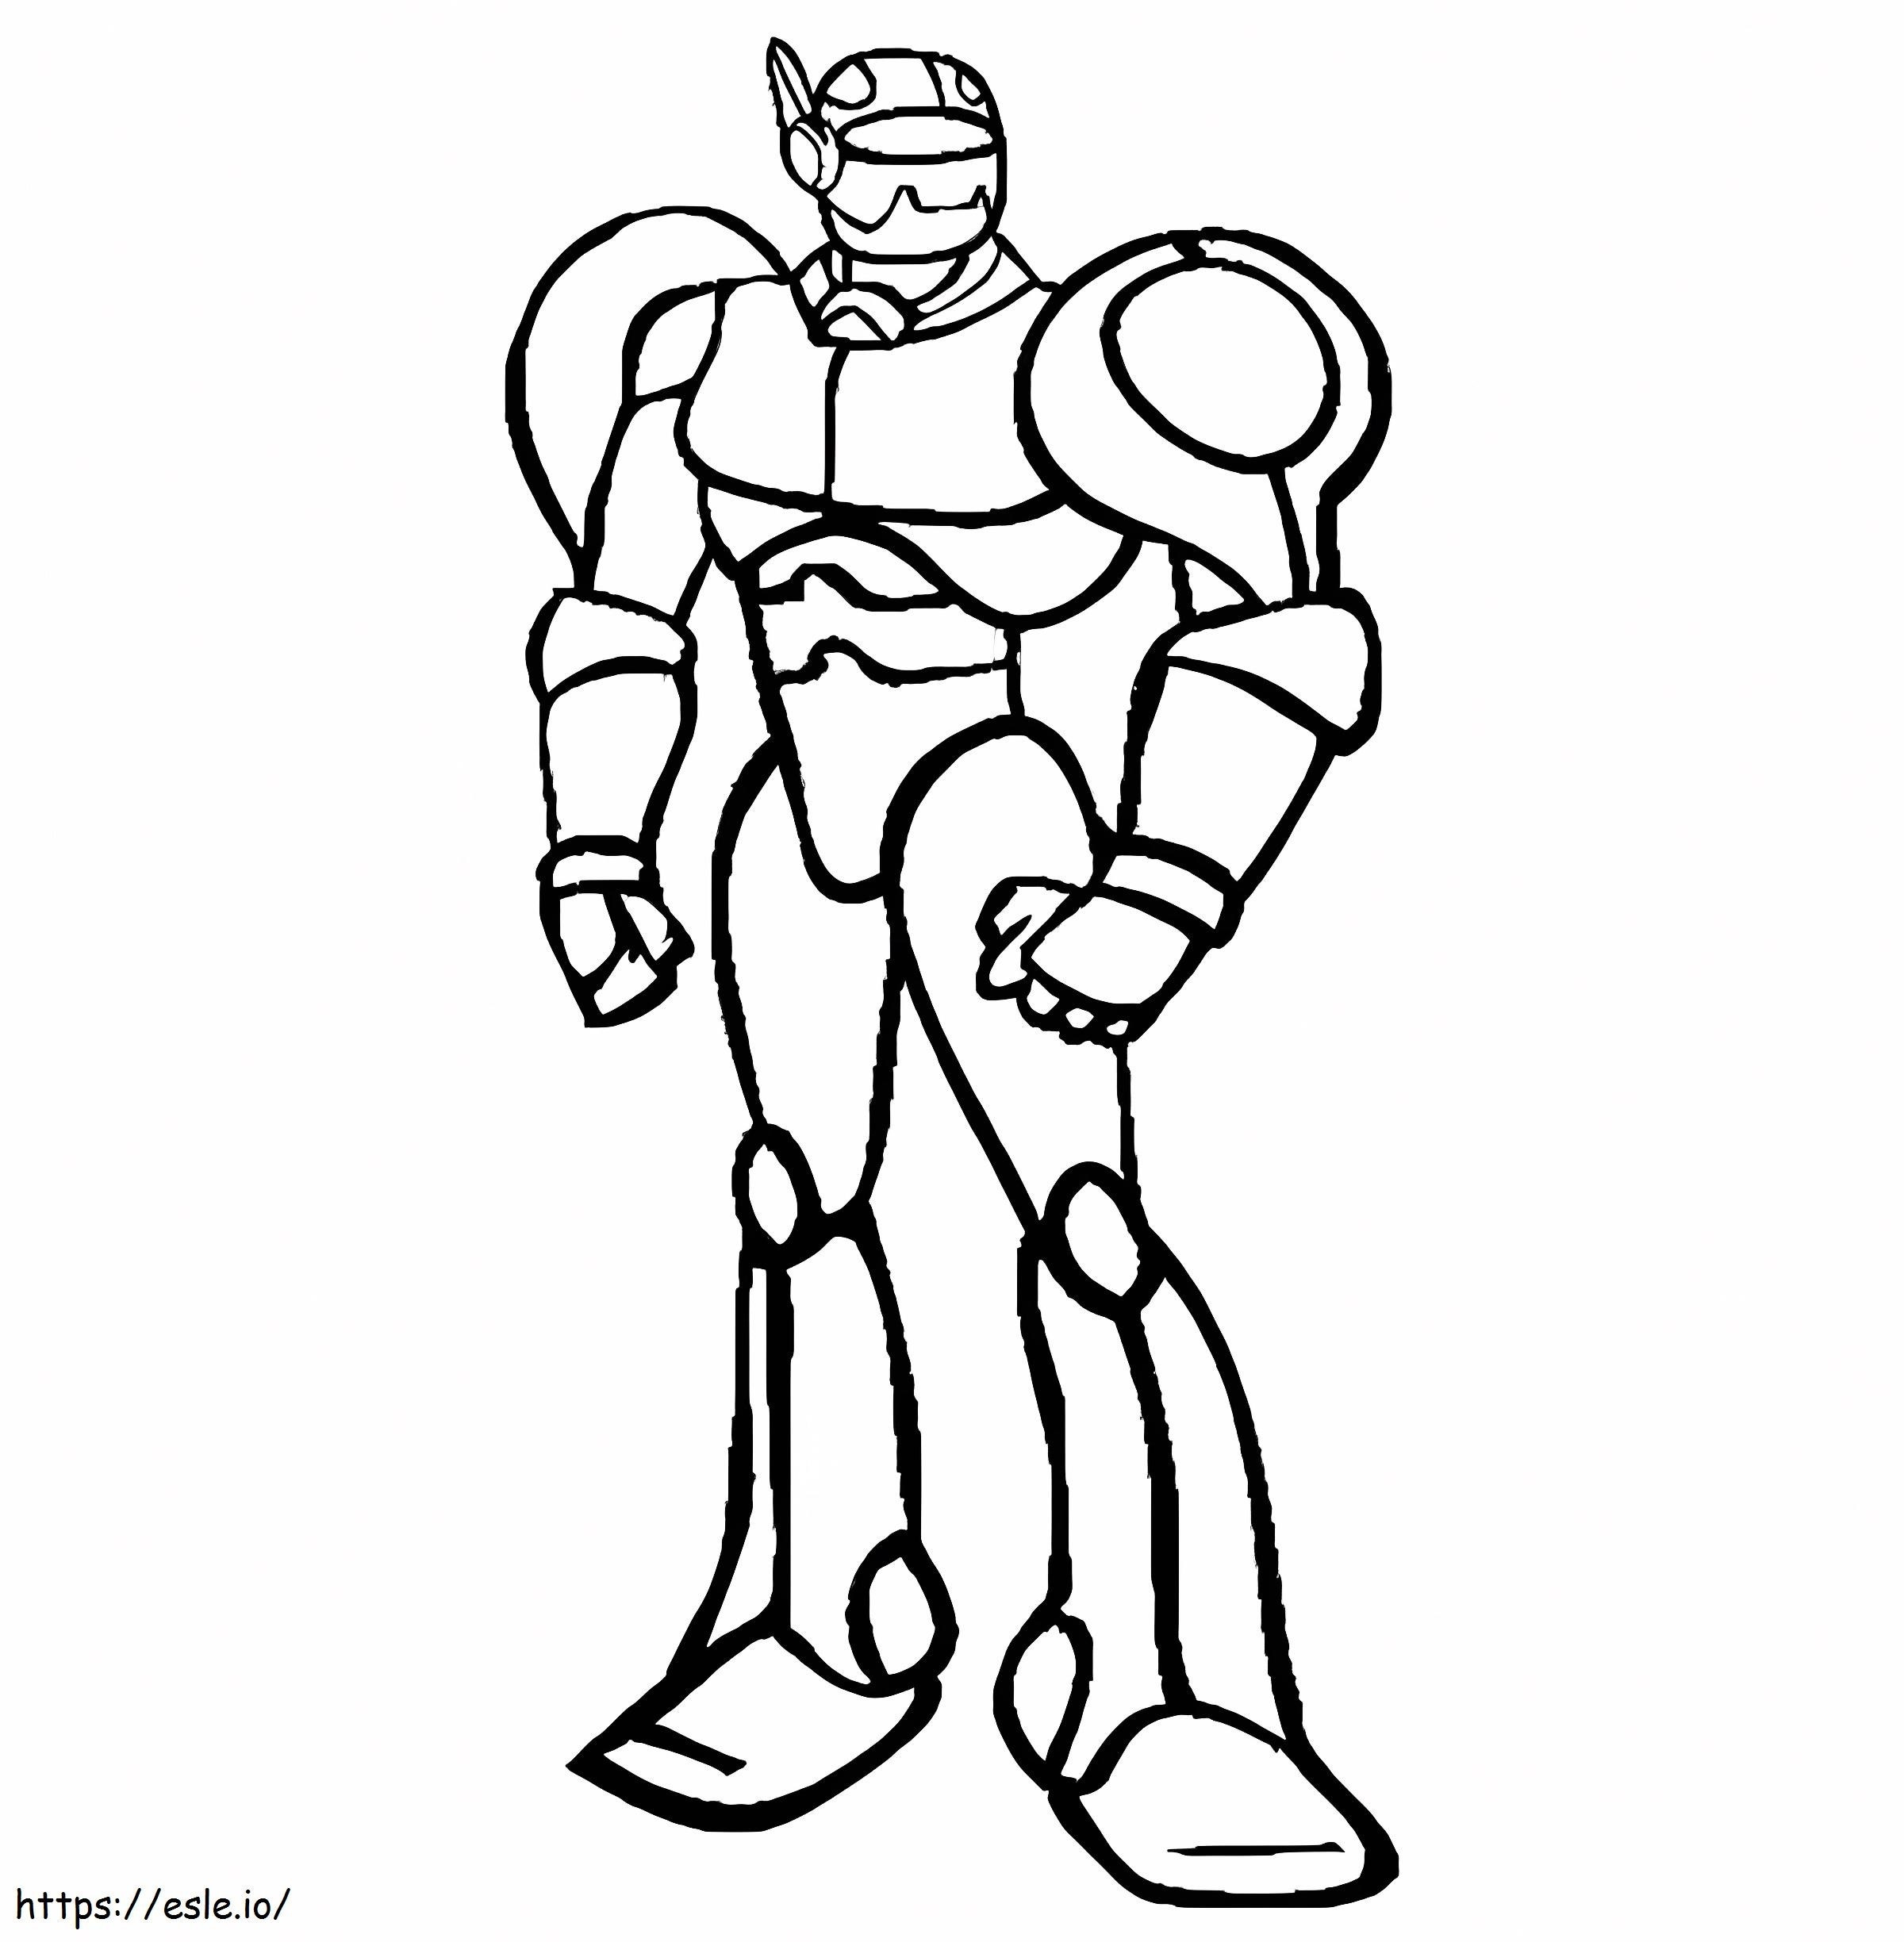 Basic Robot Guy coloring page